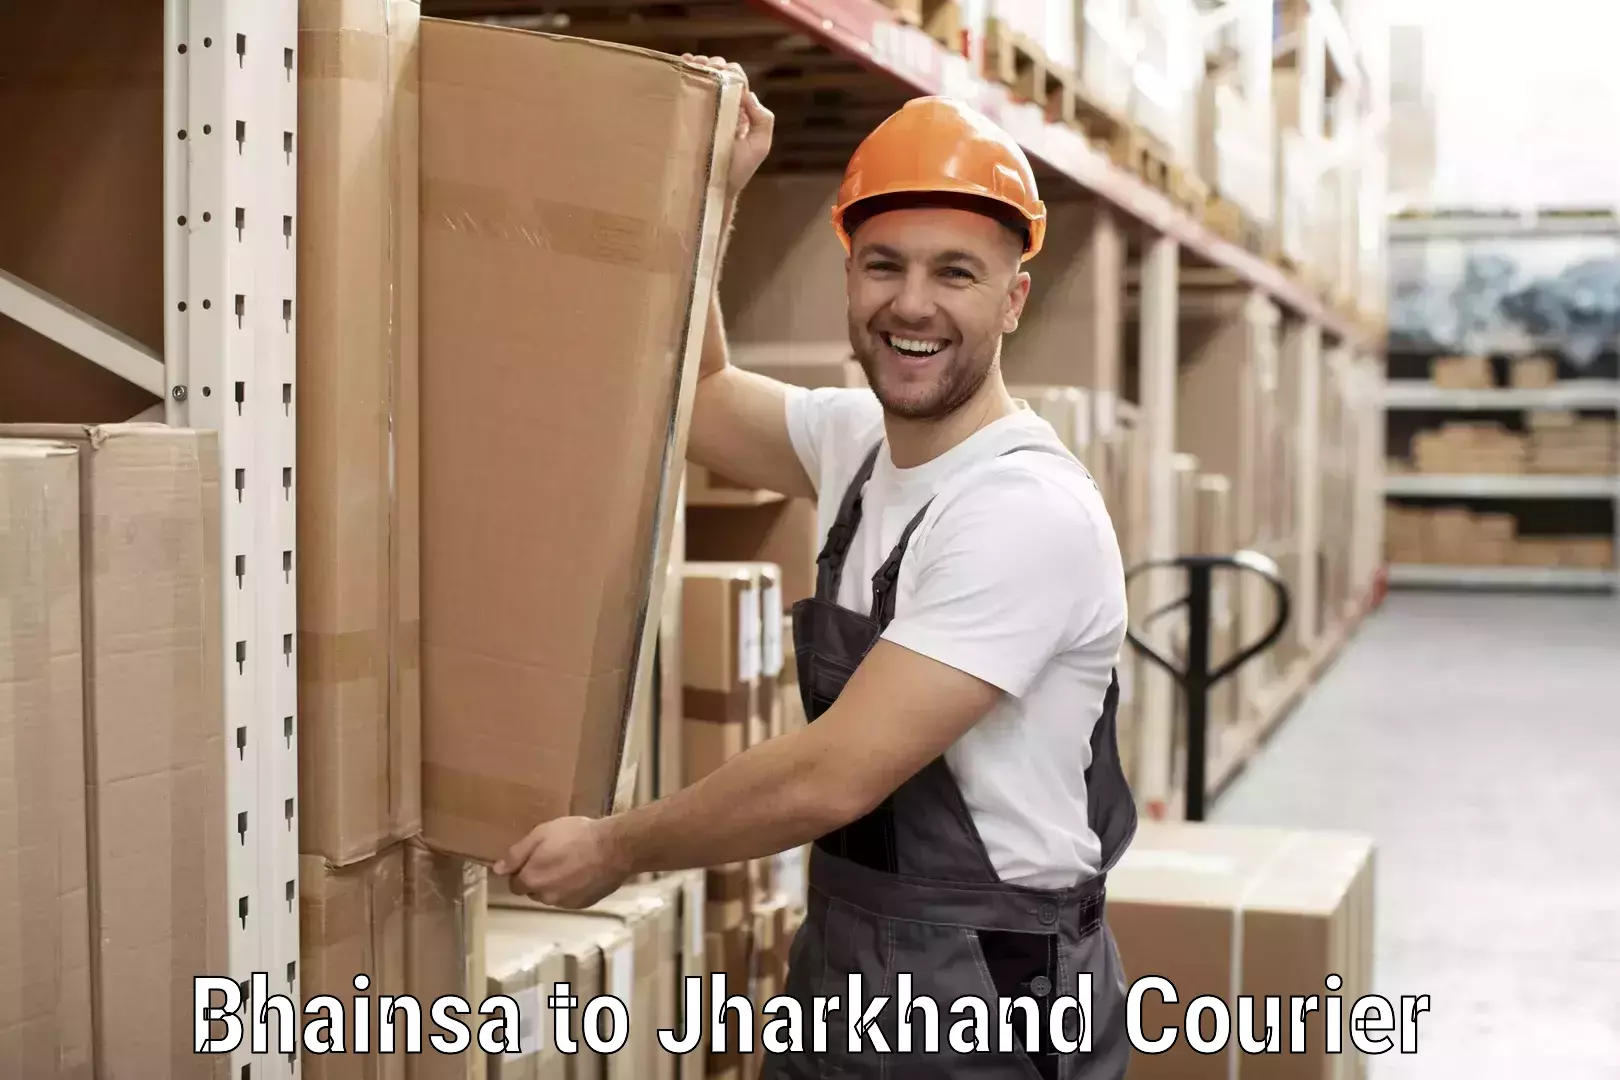 Reliable delivery network Bhainsa to Jamshedpur